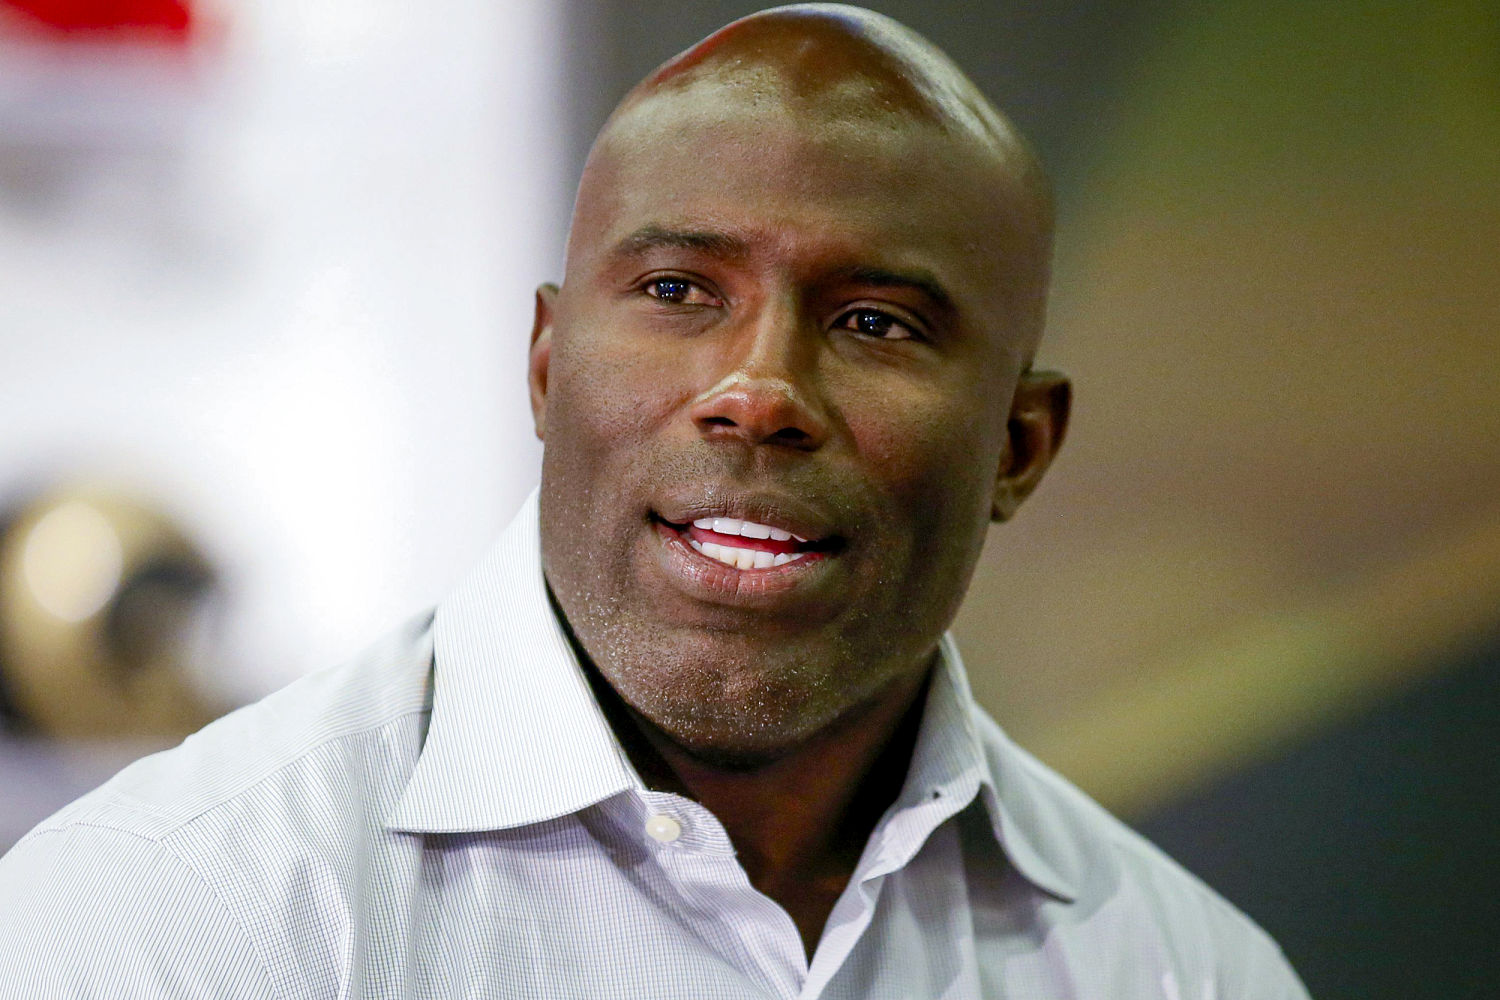 NFL star Terrell Davis hit with 'No Fly' letter after United plane incident